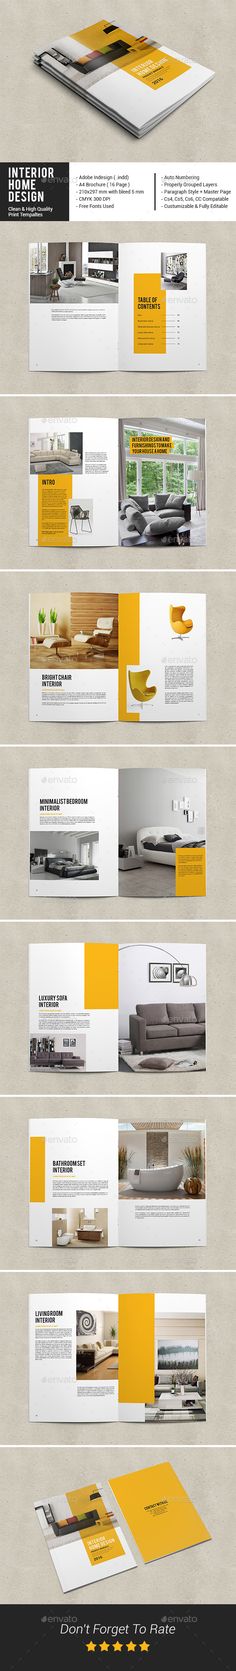 Graphicriver dwelling clean interior catalogue 13672478 download free download